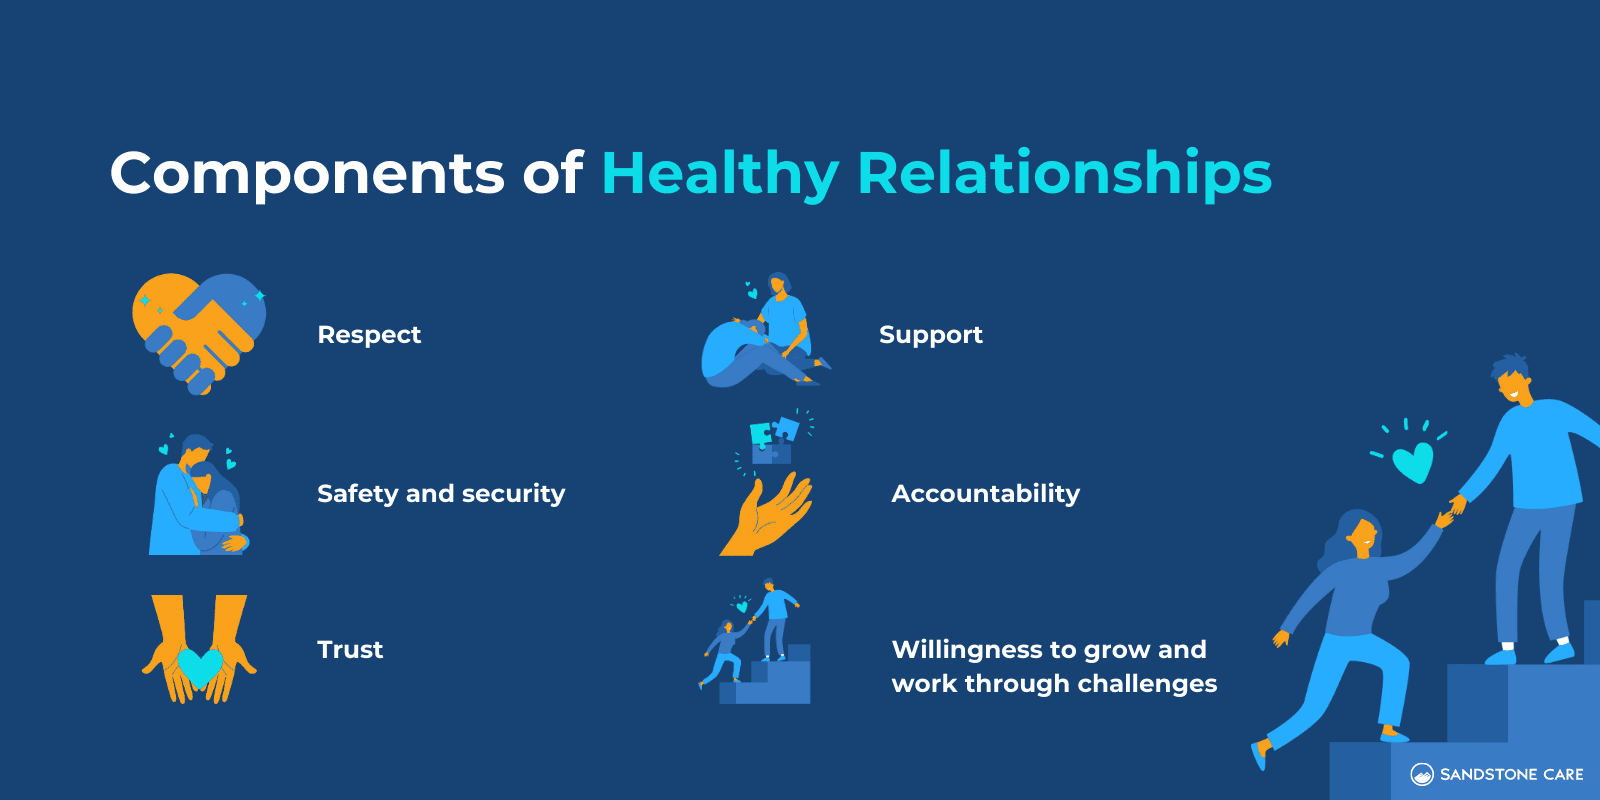 6 Components Of Healthy Relationships illustrated with relevant graphics